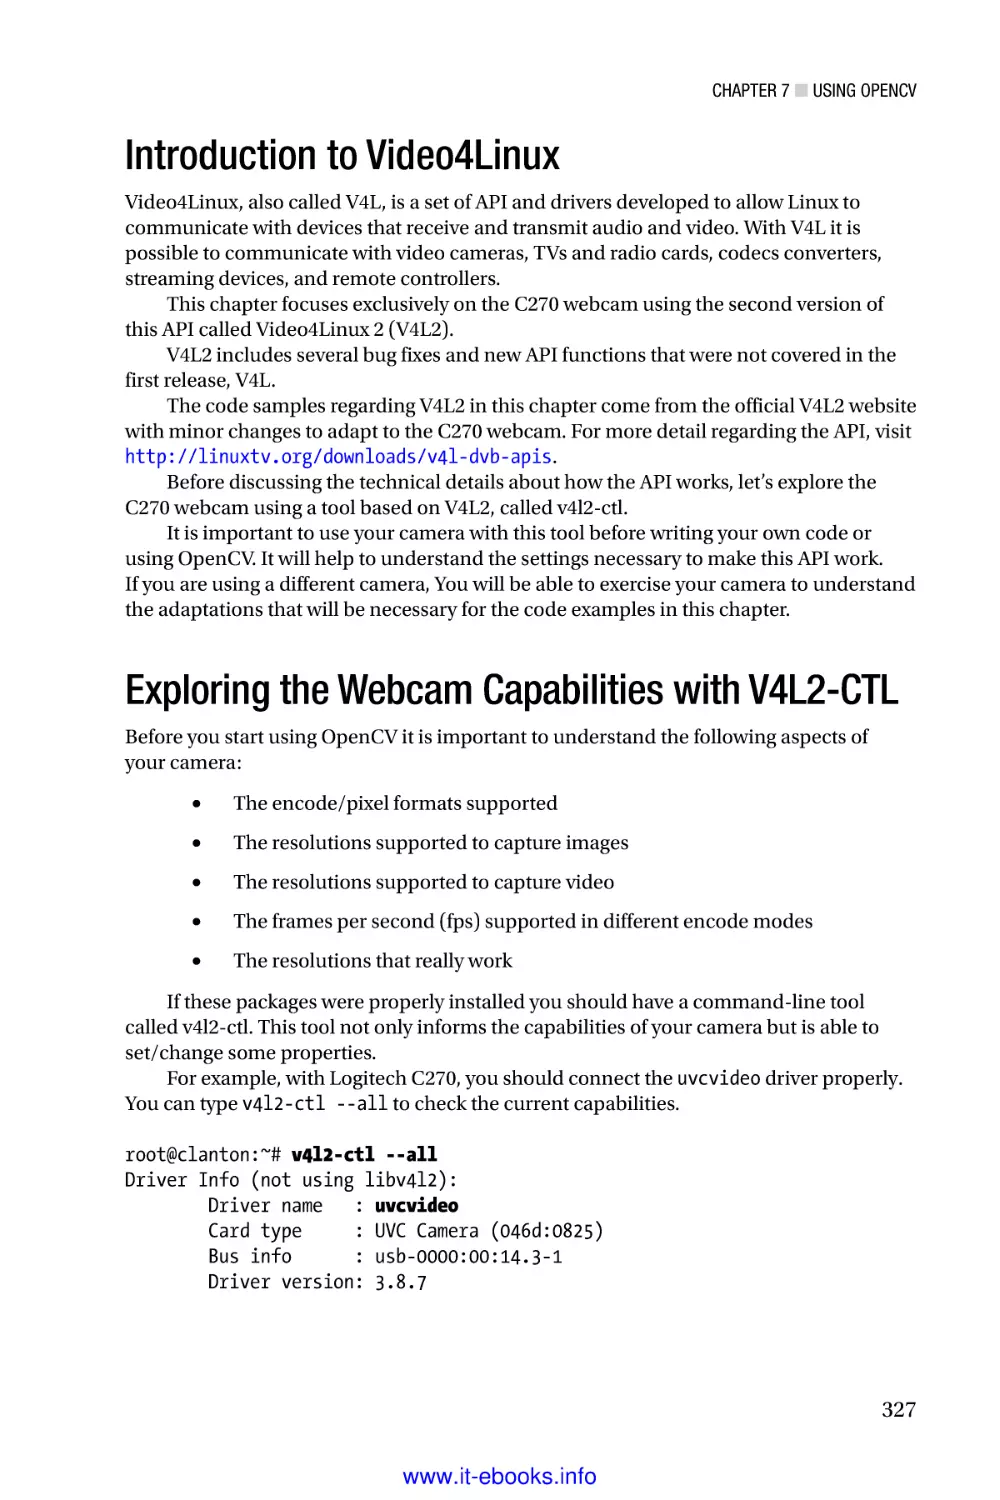 Introduction to Video4Linux
Exploring the Webcam Capabilities with V4L2-CTL